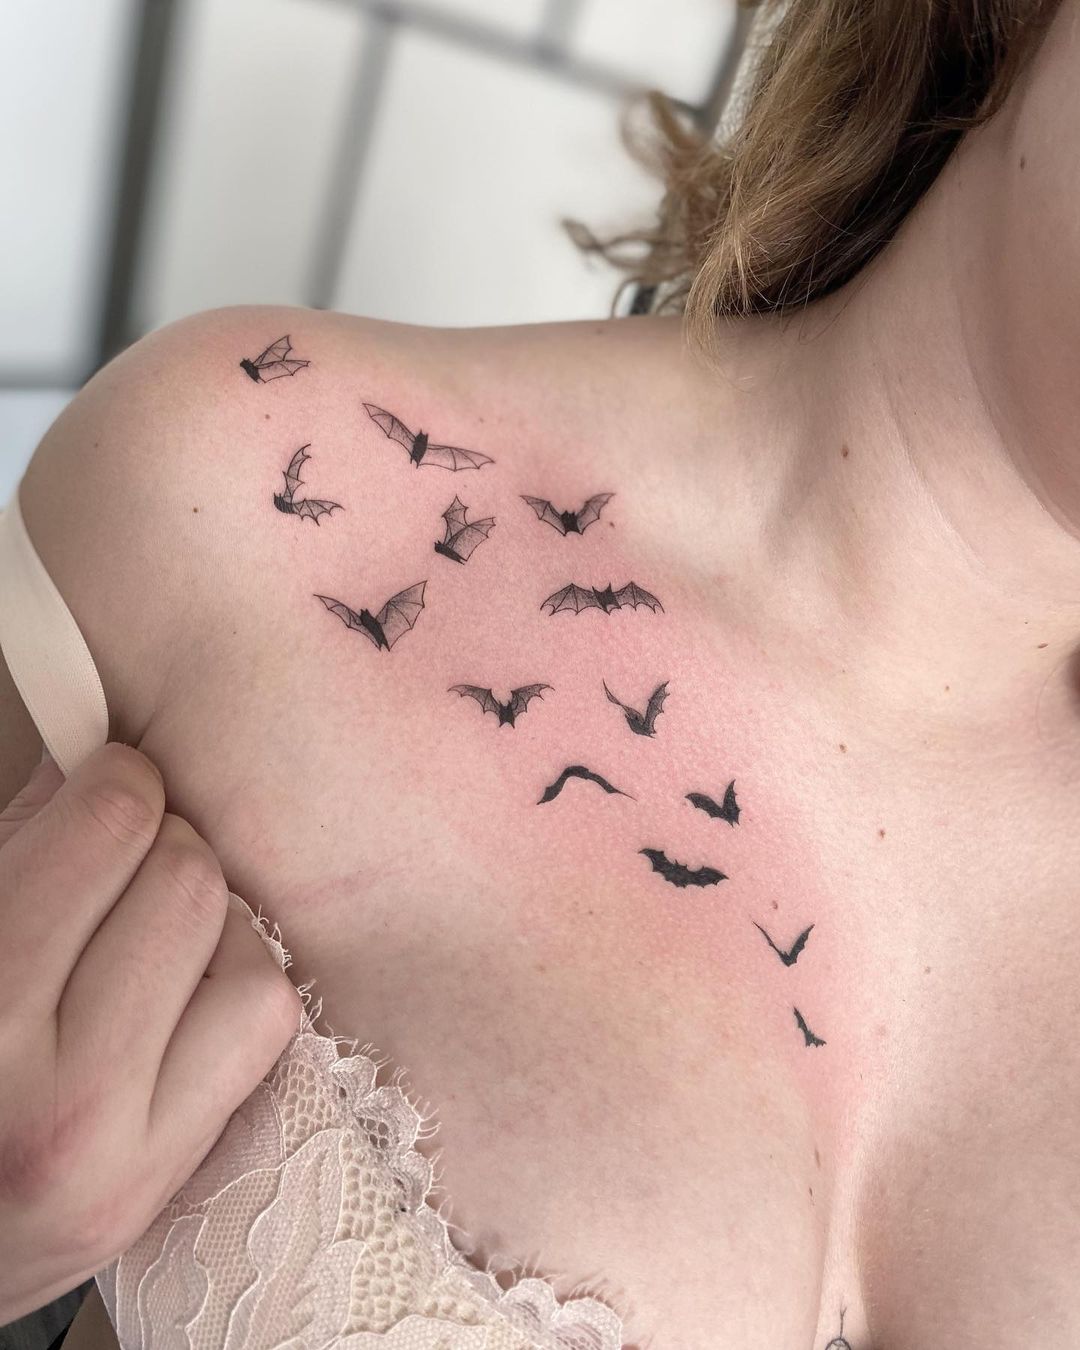 Aggregate more than 87 chest girl tattoos best - thtantai2